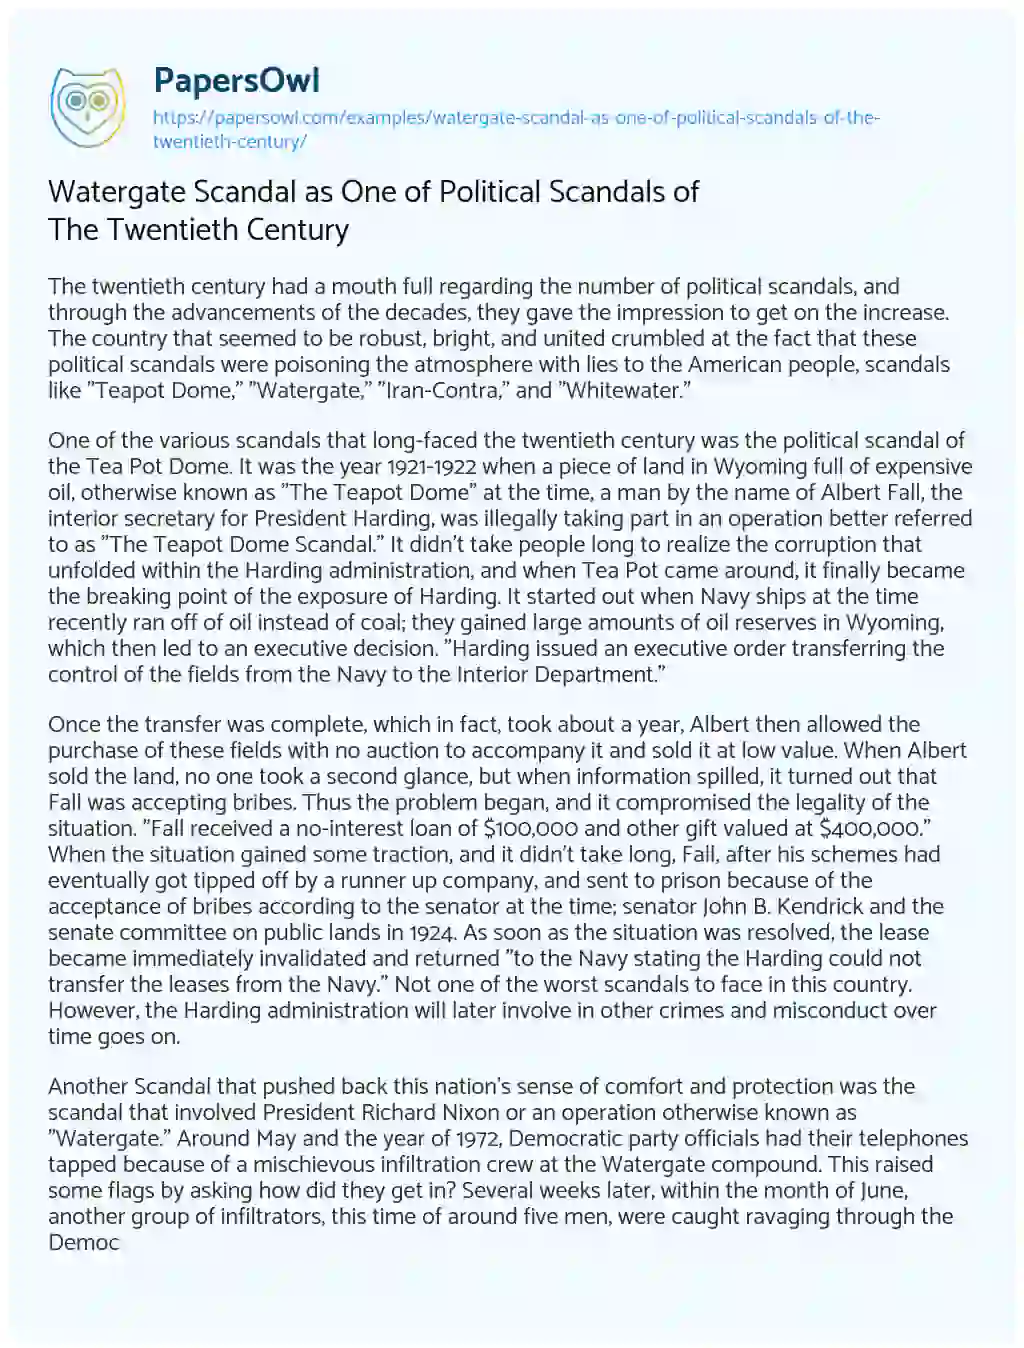 Essay on Watergate Scandal as One of Political Scandals of the Twentieth Century